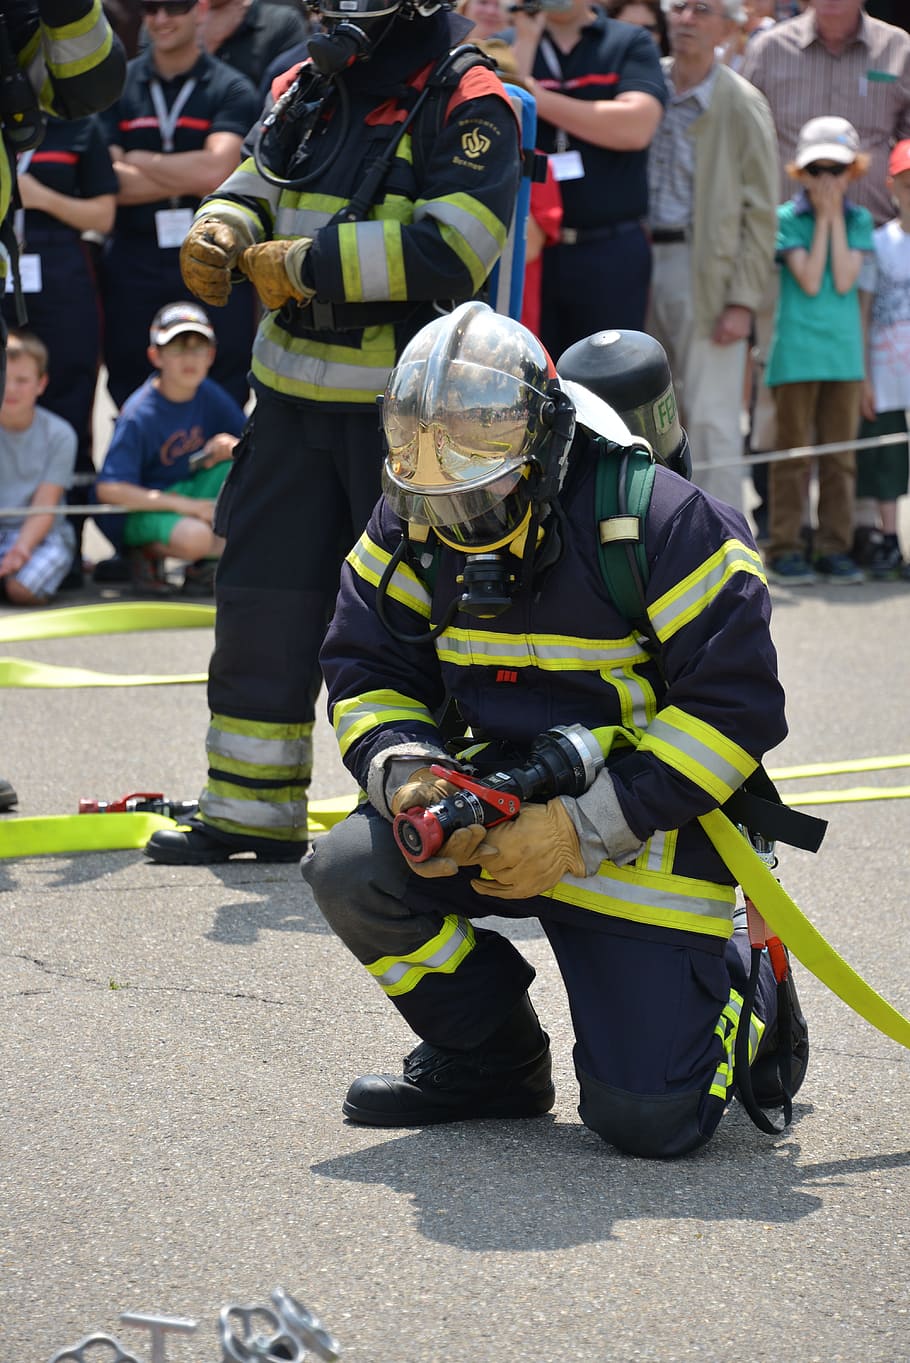 fire fighter, fire, respiratory protection, feuerloeschuebung, firefighters, delete, breathing apparatus, use, delete exercise, brand